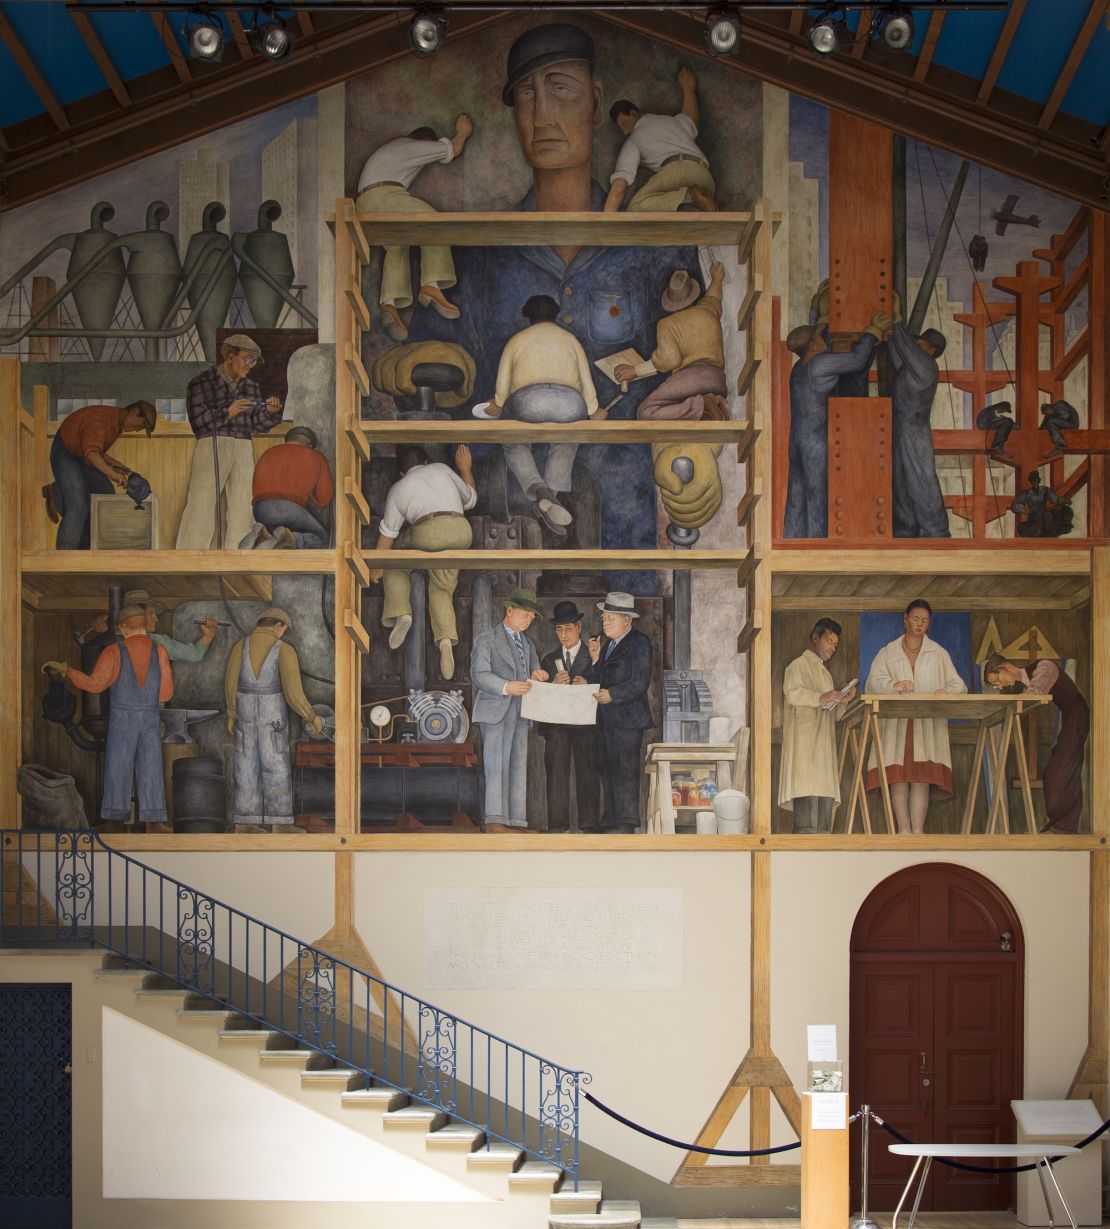 Diego Rivera's "The Making of a Fresco" is at the San Francisco Art Institute.